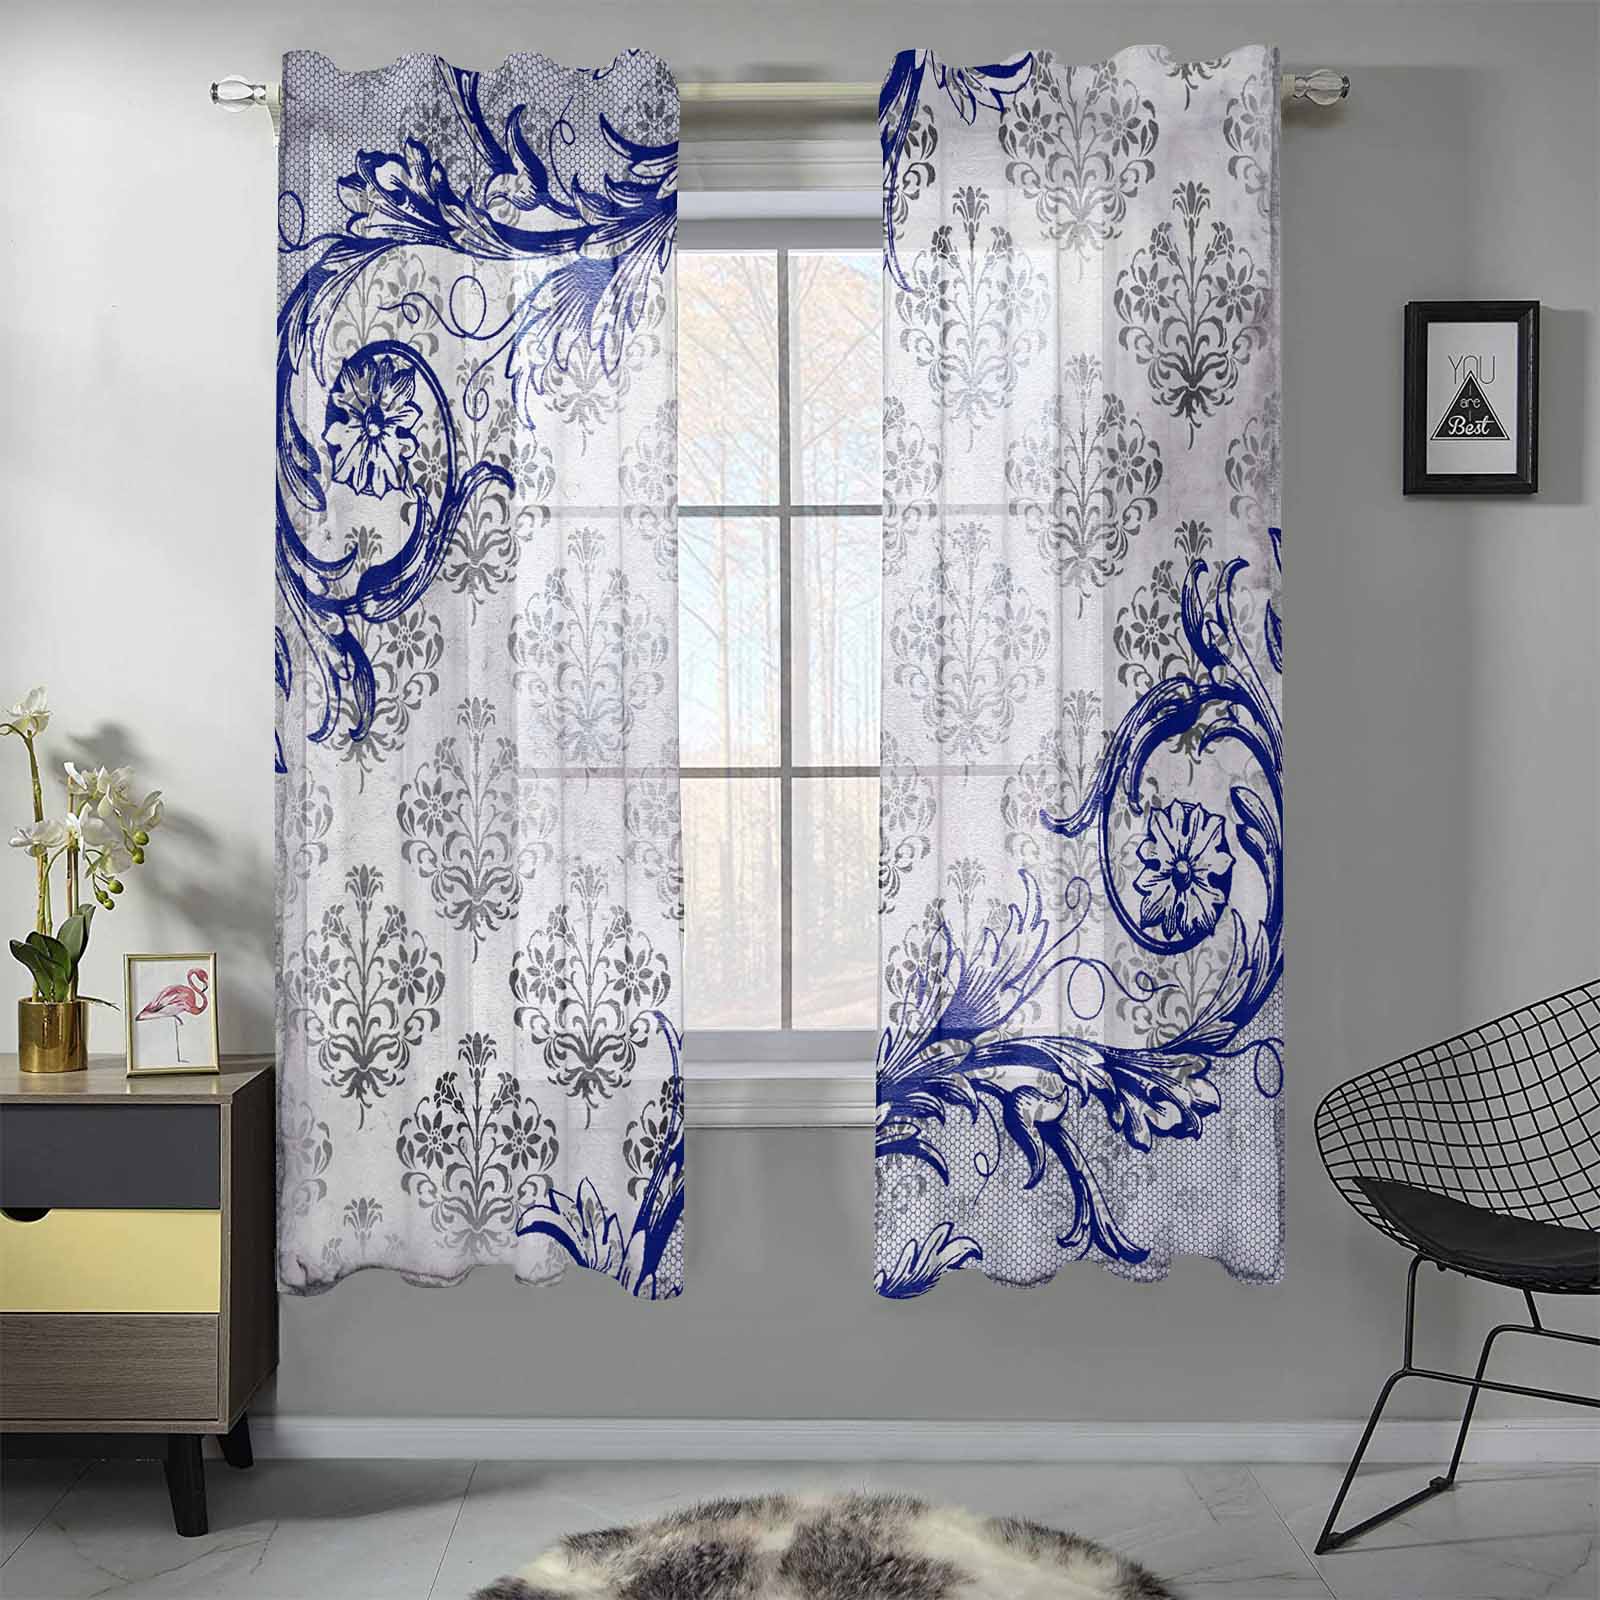 Sheer 2-Panel Window Curtains in Gothic Damask Print